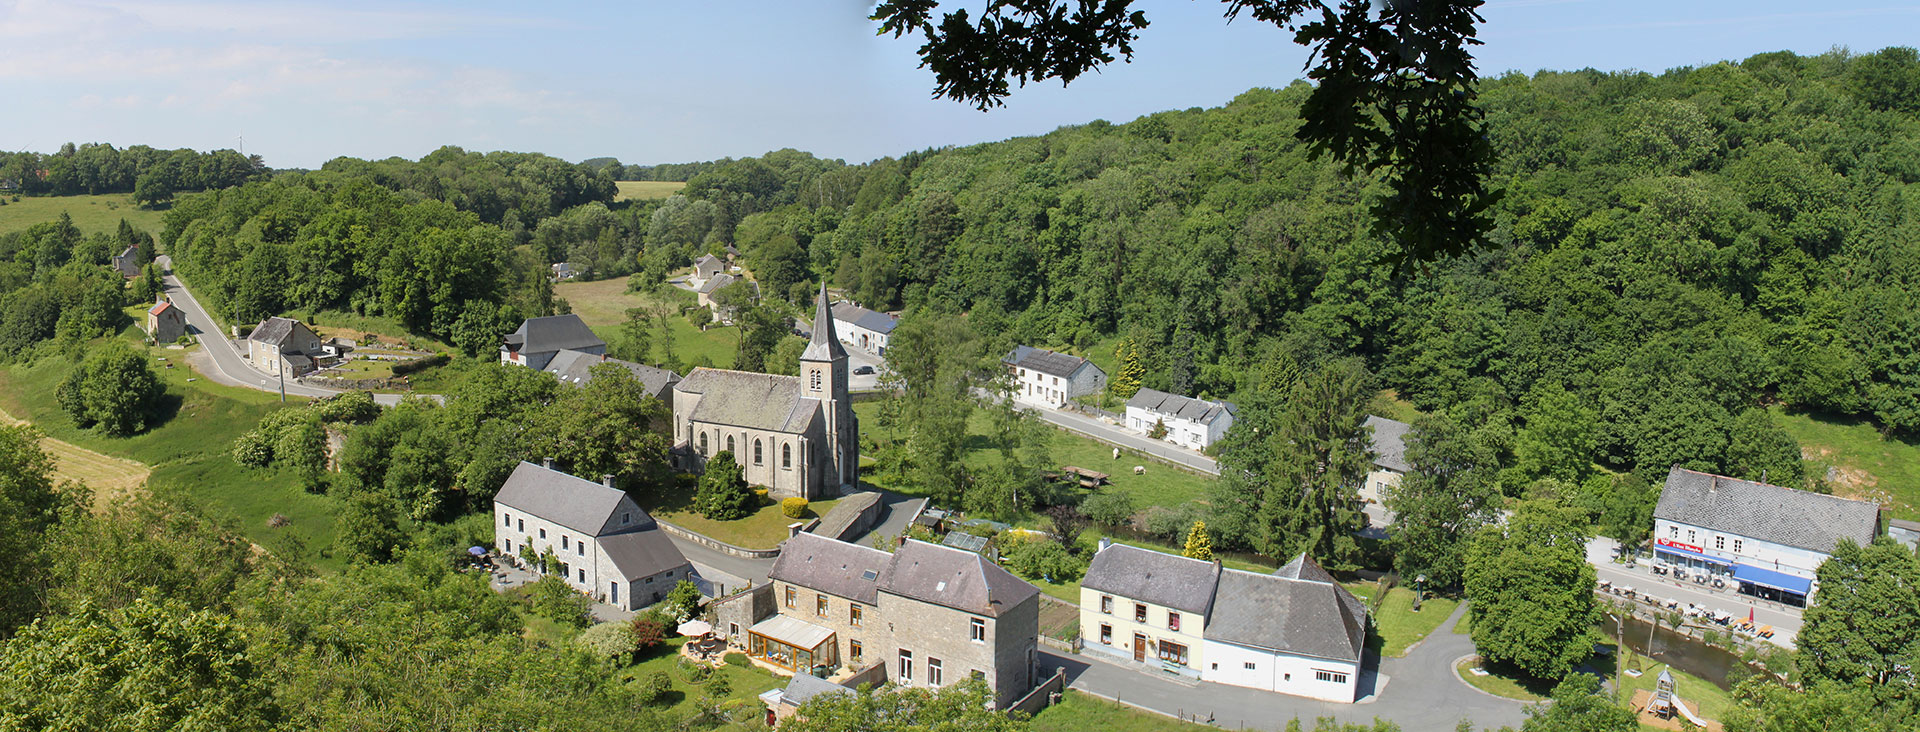 Lompret, one of the Most Beautiful Villages in Wallonia - belltower - nature - blue sky - landscape